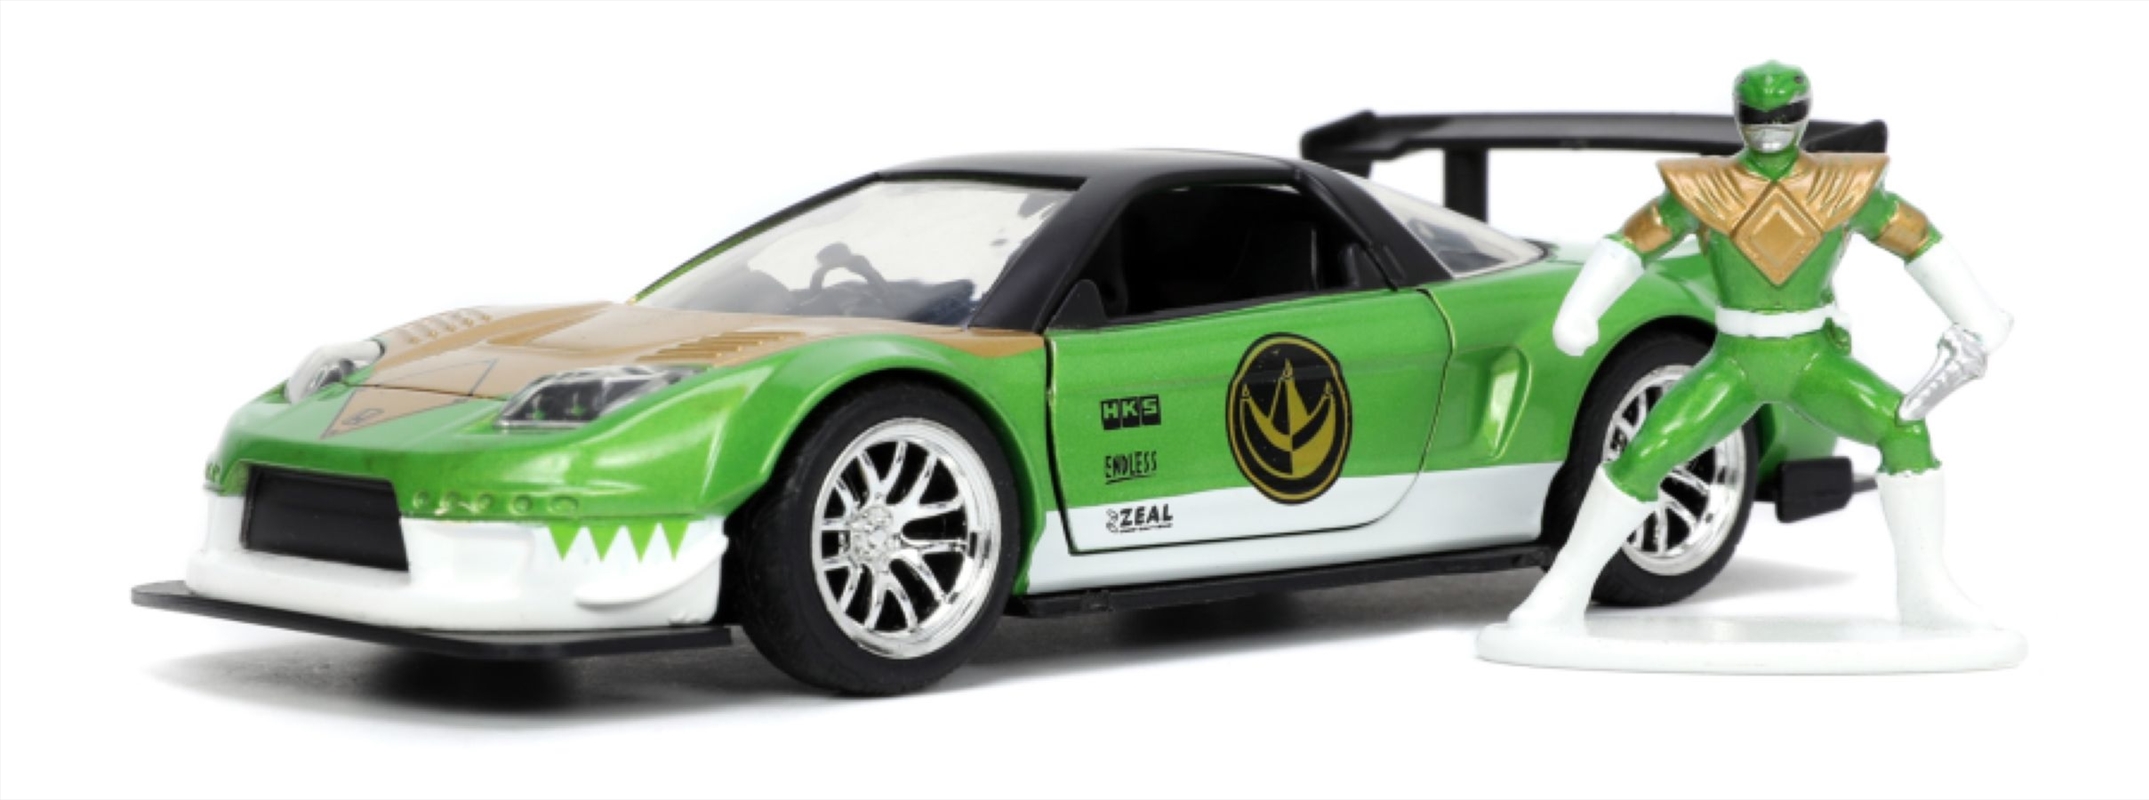 Power Rangers - 2002 Honda NSX with Green Ranger 1:32 Scale Hollywood Ride/Product Detail/Figurines